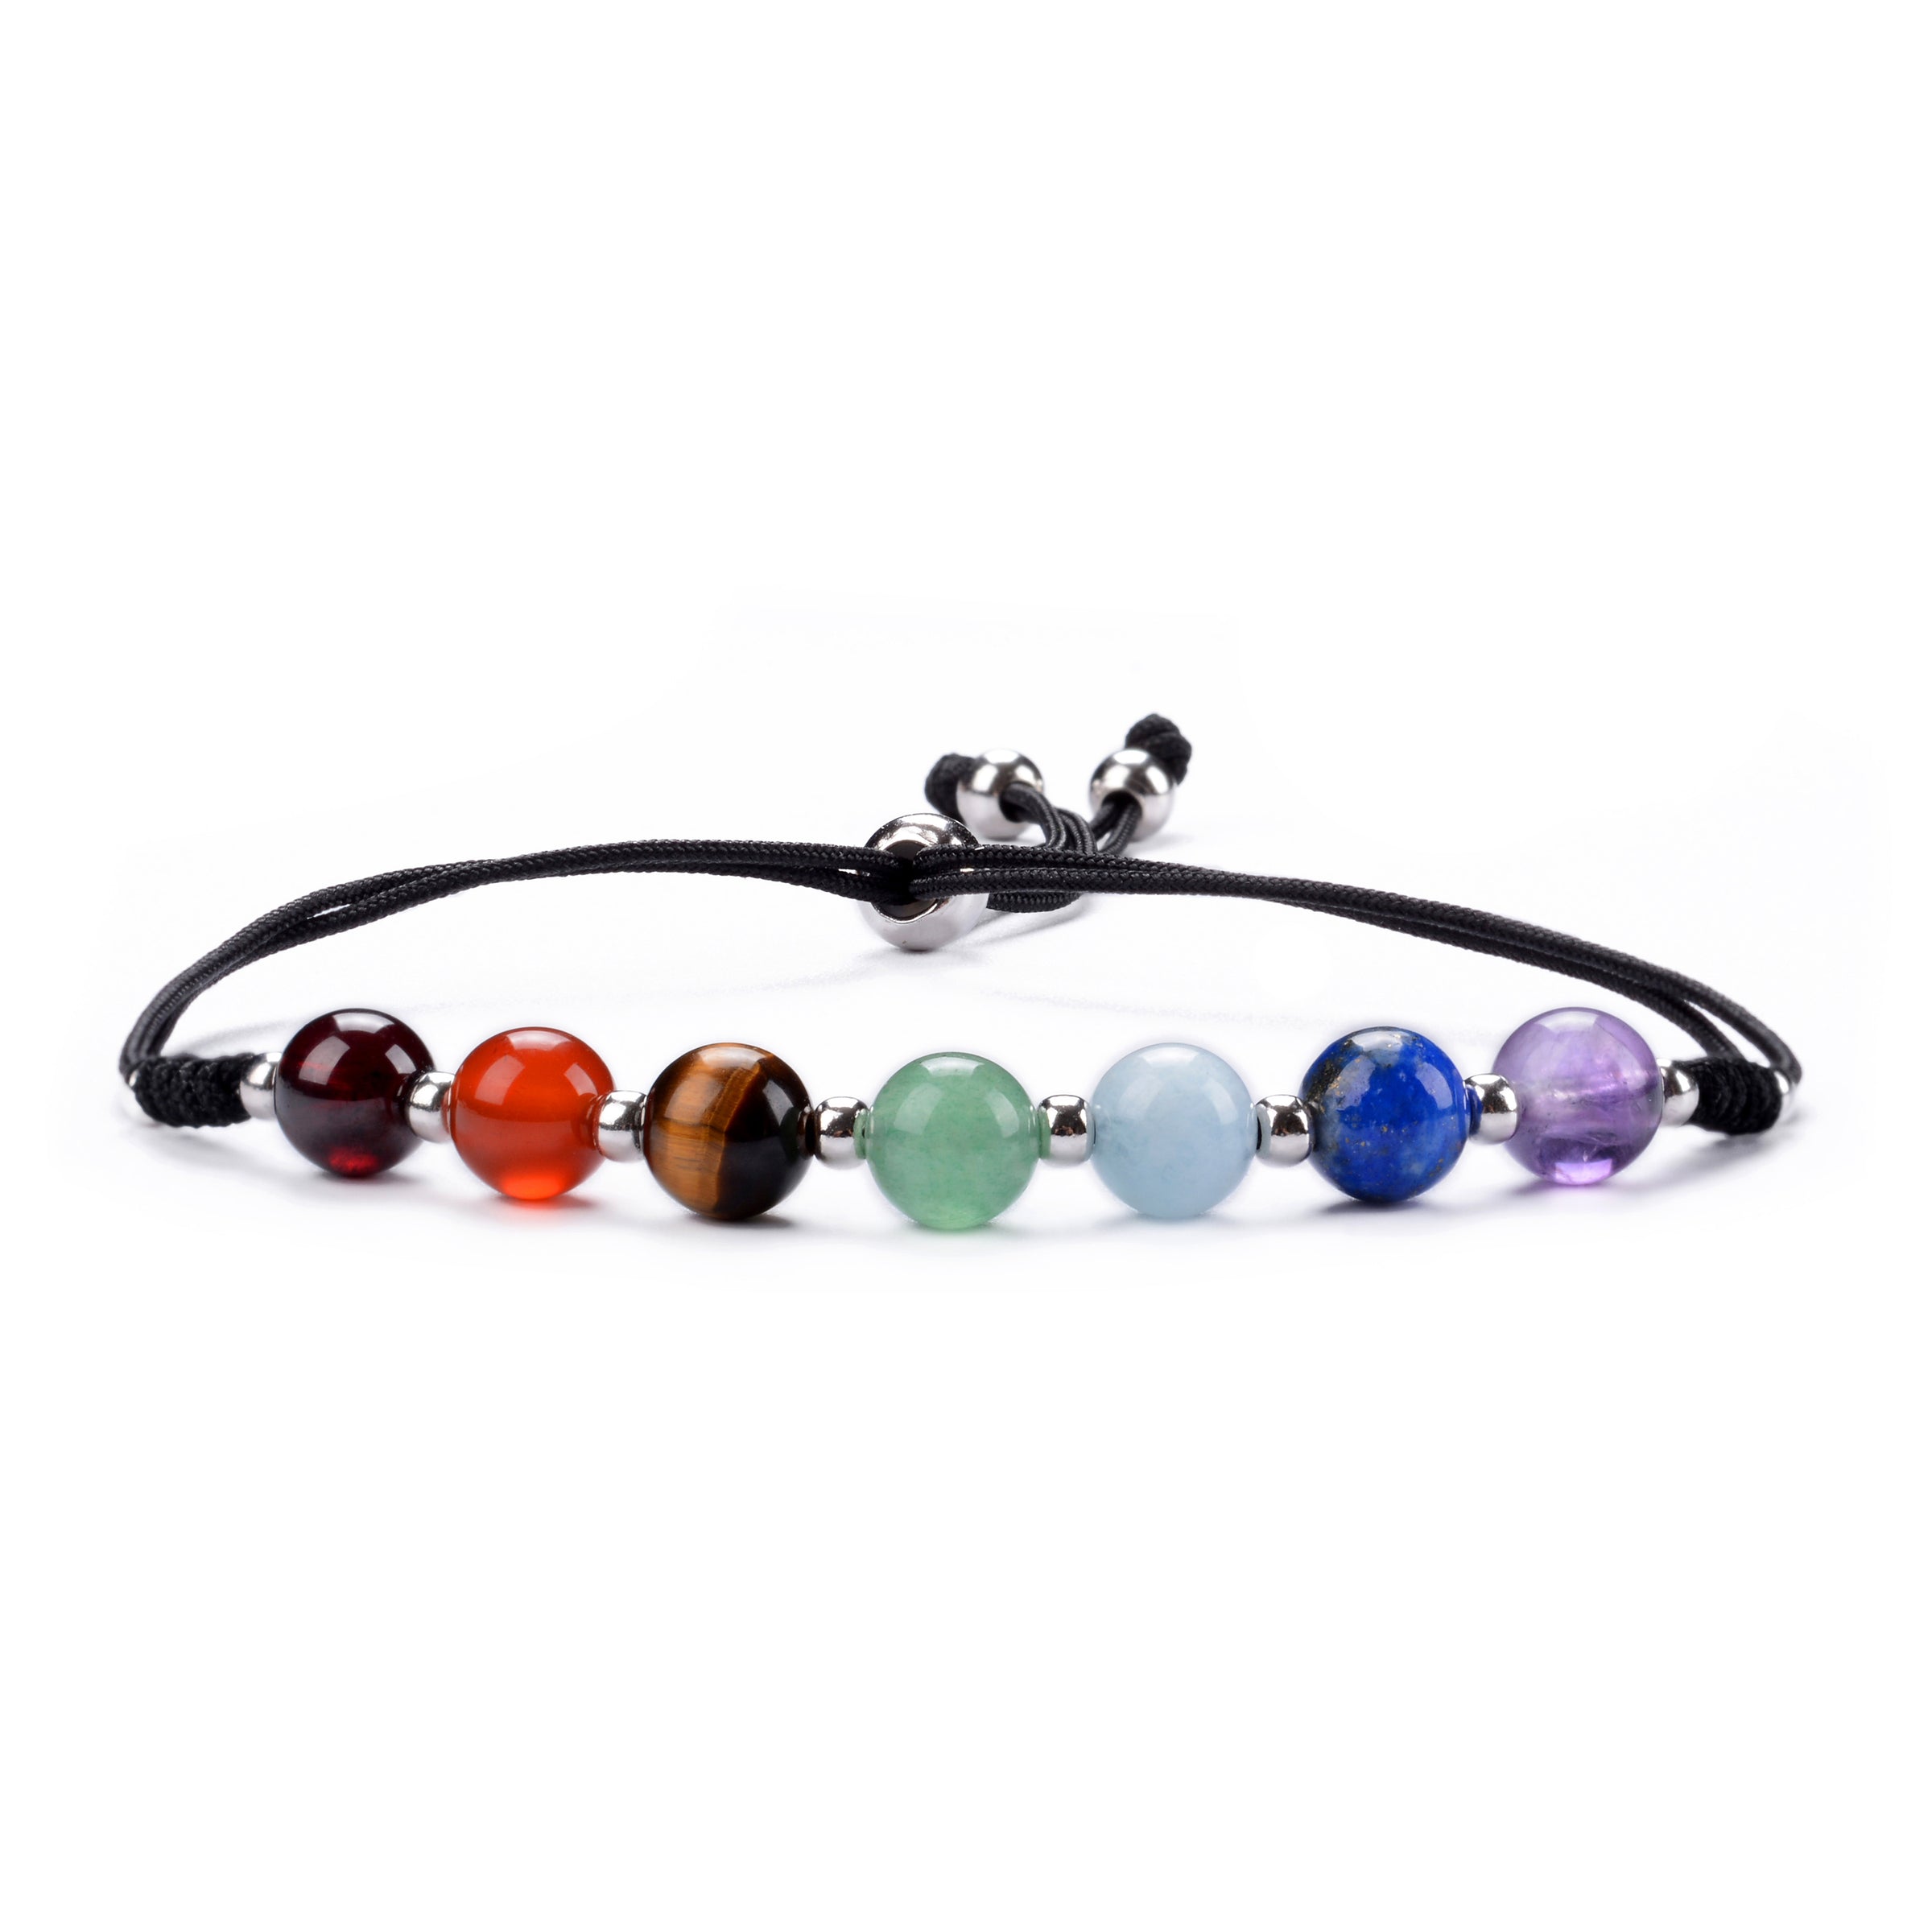 Chakra Bracelet | Adjustable Size Nylon Cord | 6mm Beads with Sterling Silver Spacers (Black) Medium